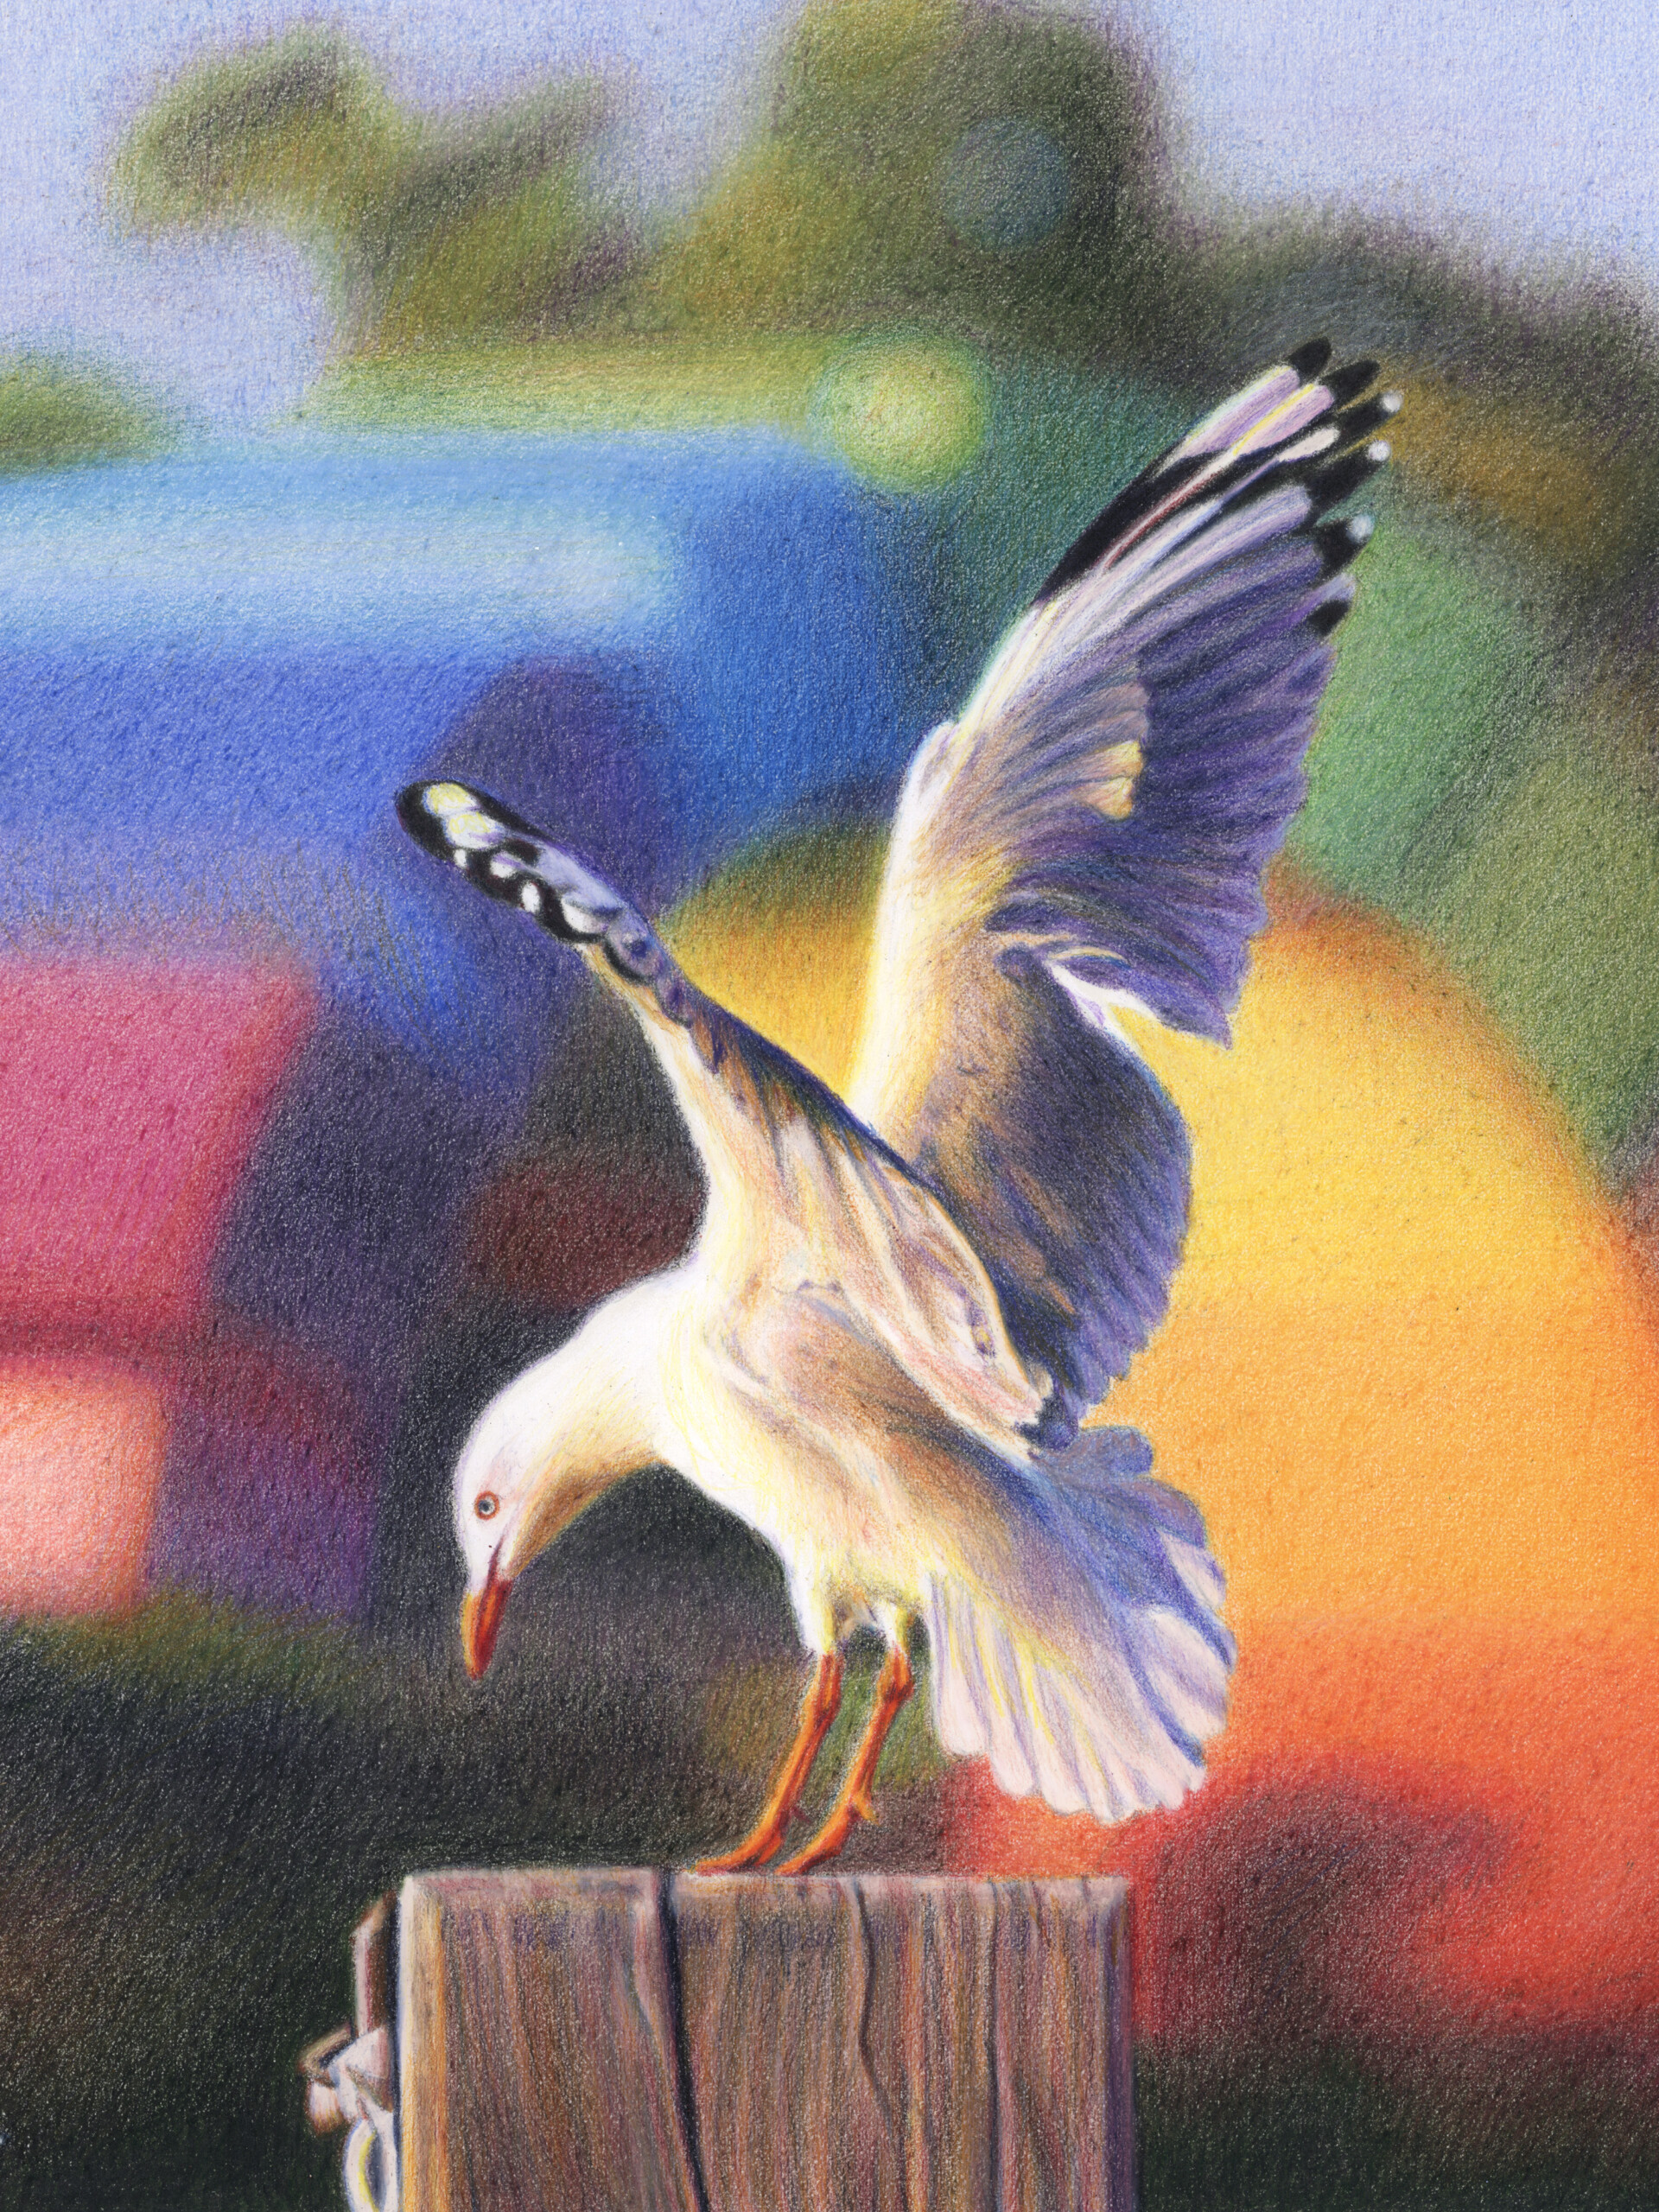 Detail of a colour pencil drawing of a seagull at the point of taking off. Julie Podstolski, Ready to Fly, 2023, 28 x 31 cm. Coloured pencils and Neocolor II soluble pastels on Arches Aquarelle paper.